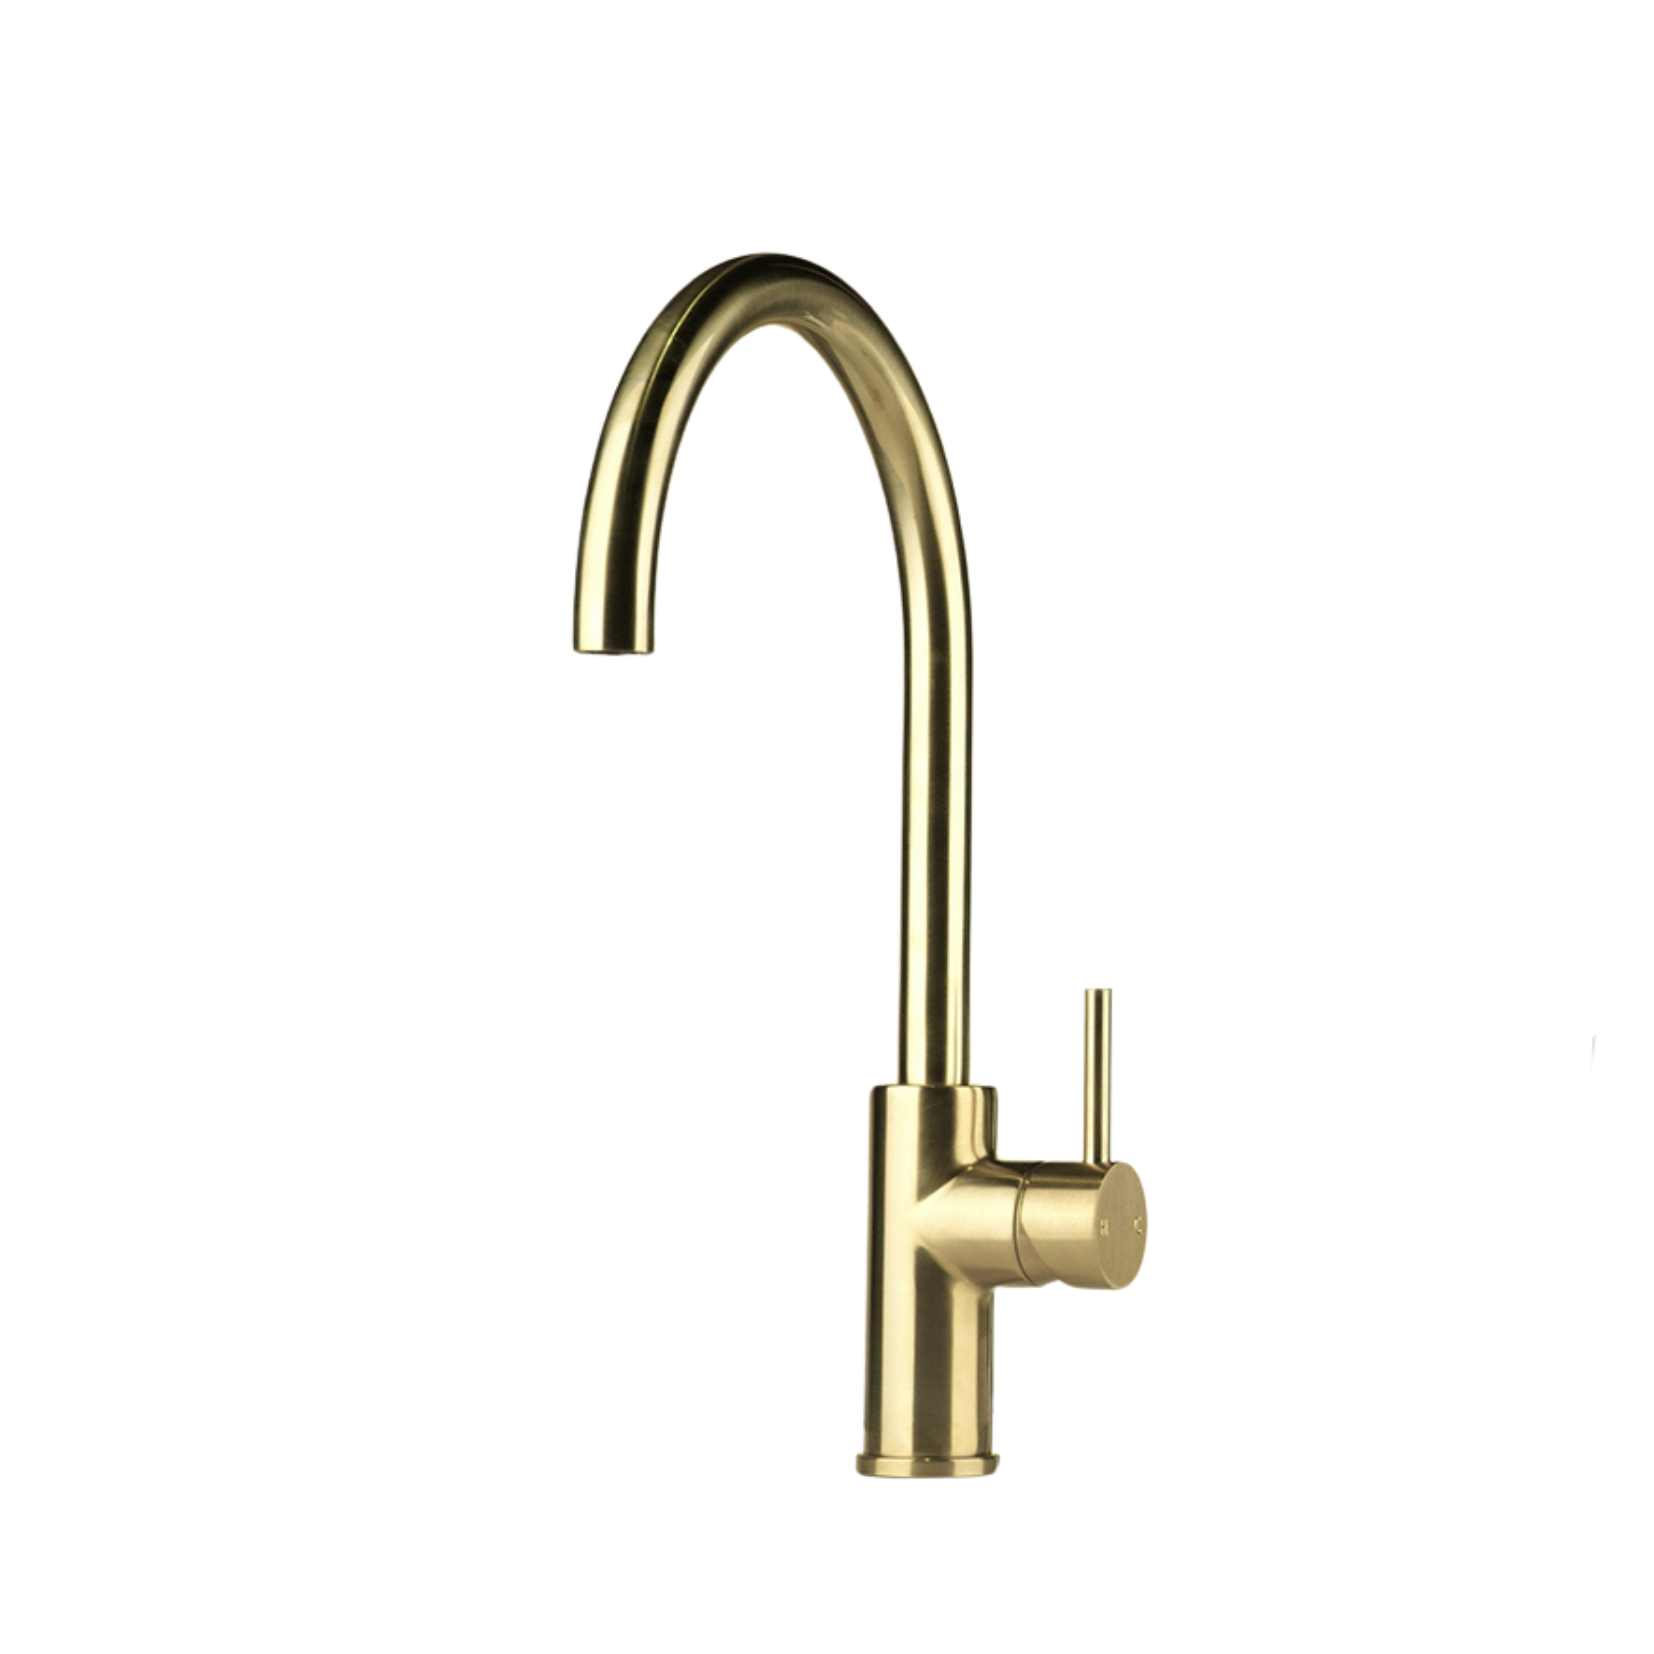 Faucet Strommen Raw Brushed Brass Tap